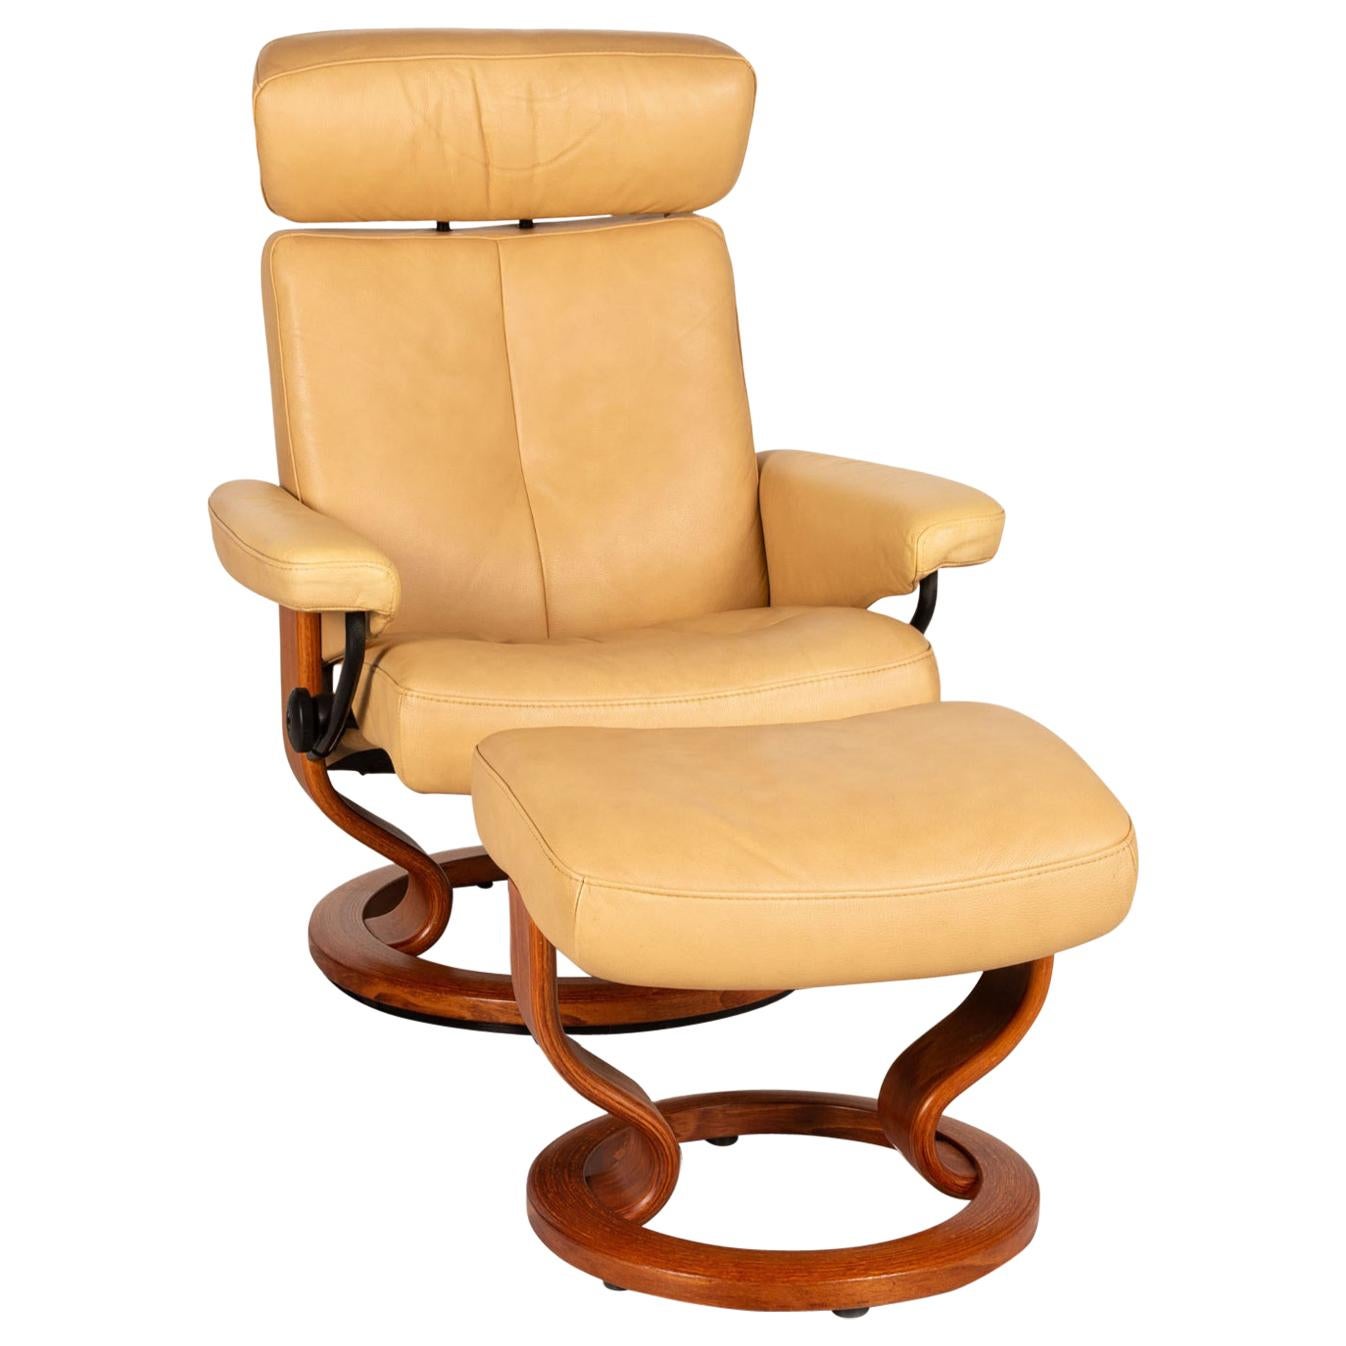 Stressless Orion Leather Armchair Beige Incl. Stool Function Relaxation Function For Sale